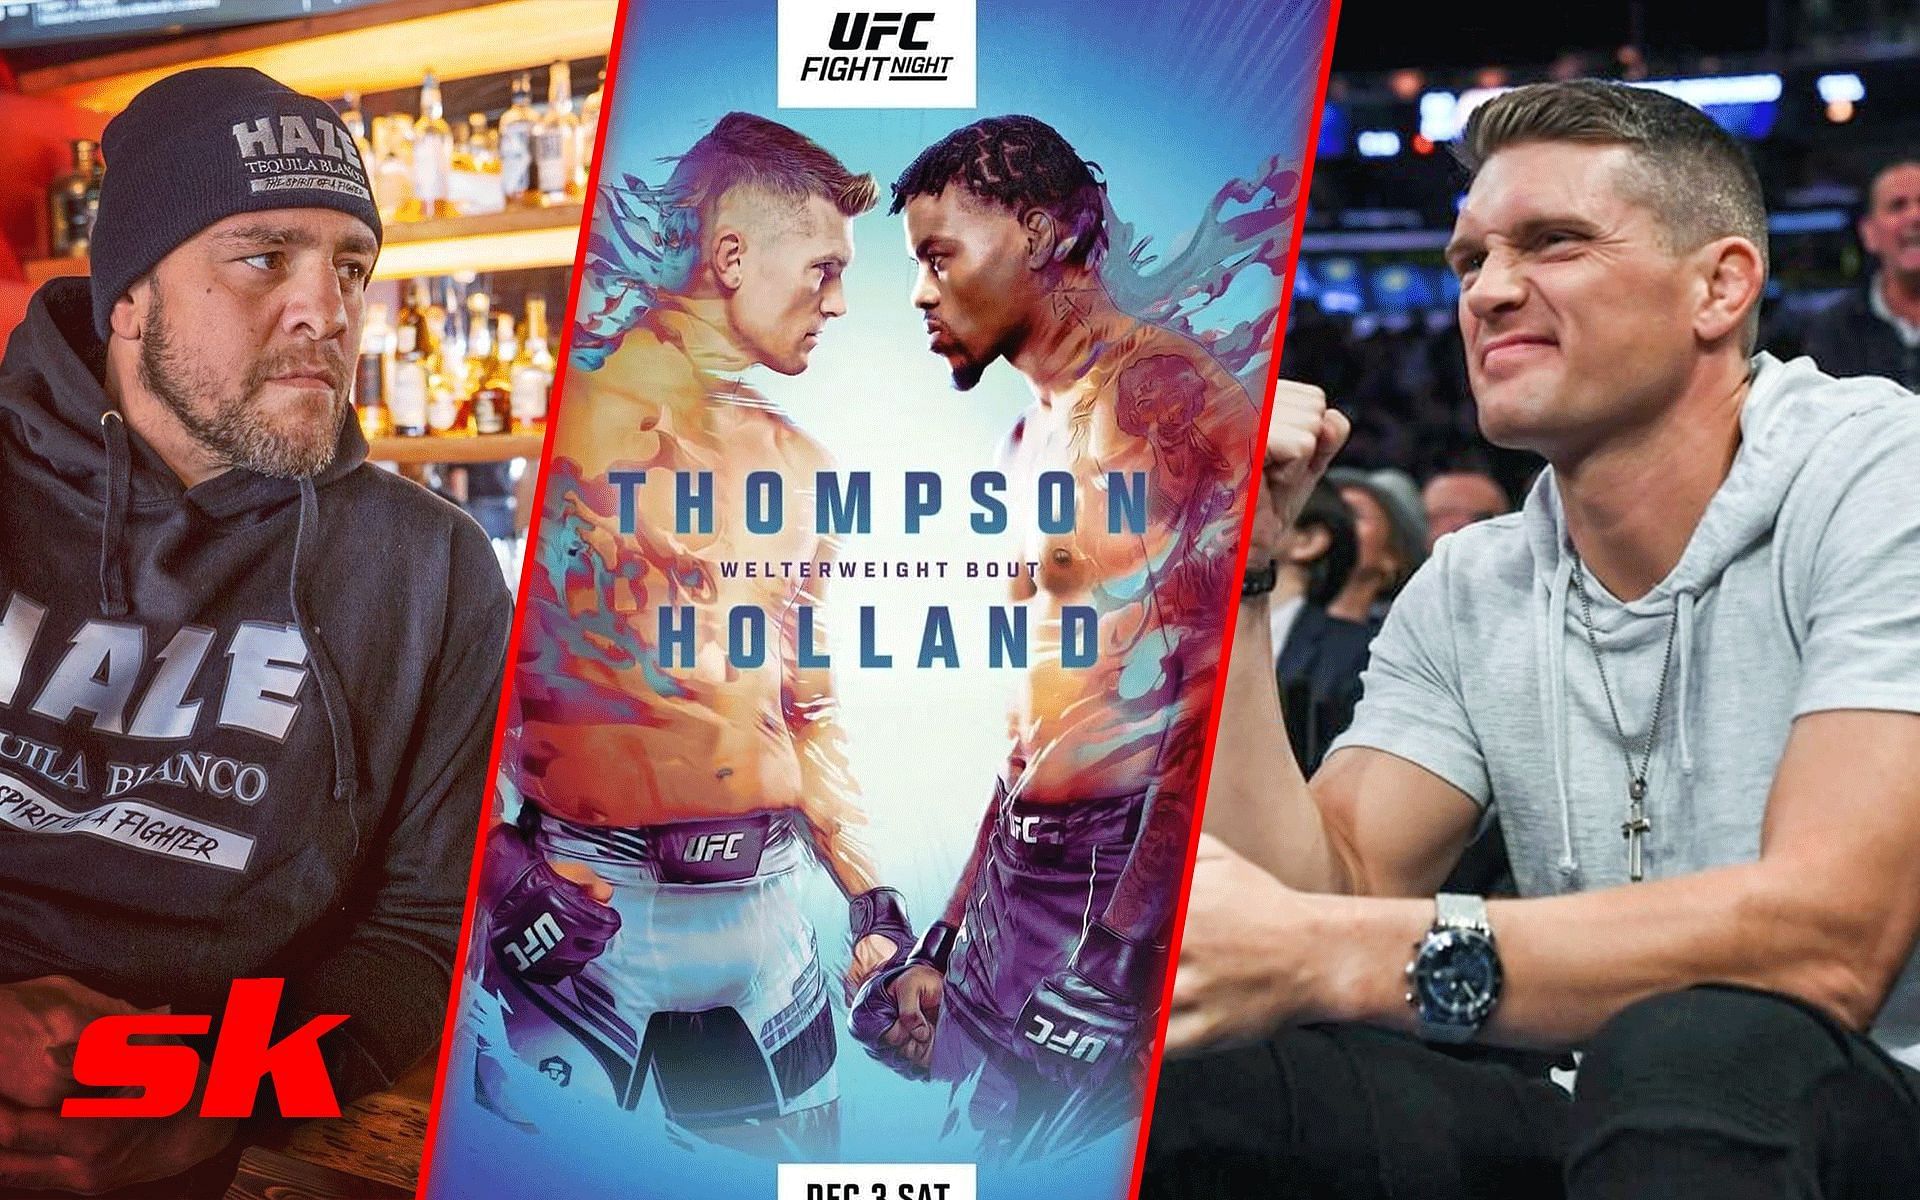 Stephen Thompson eyeing potential showdown with UFC legend Nick Diaz after upcoming fight [Images via: @nickdiaz209 and @wonderboymma on Instagram]